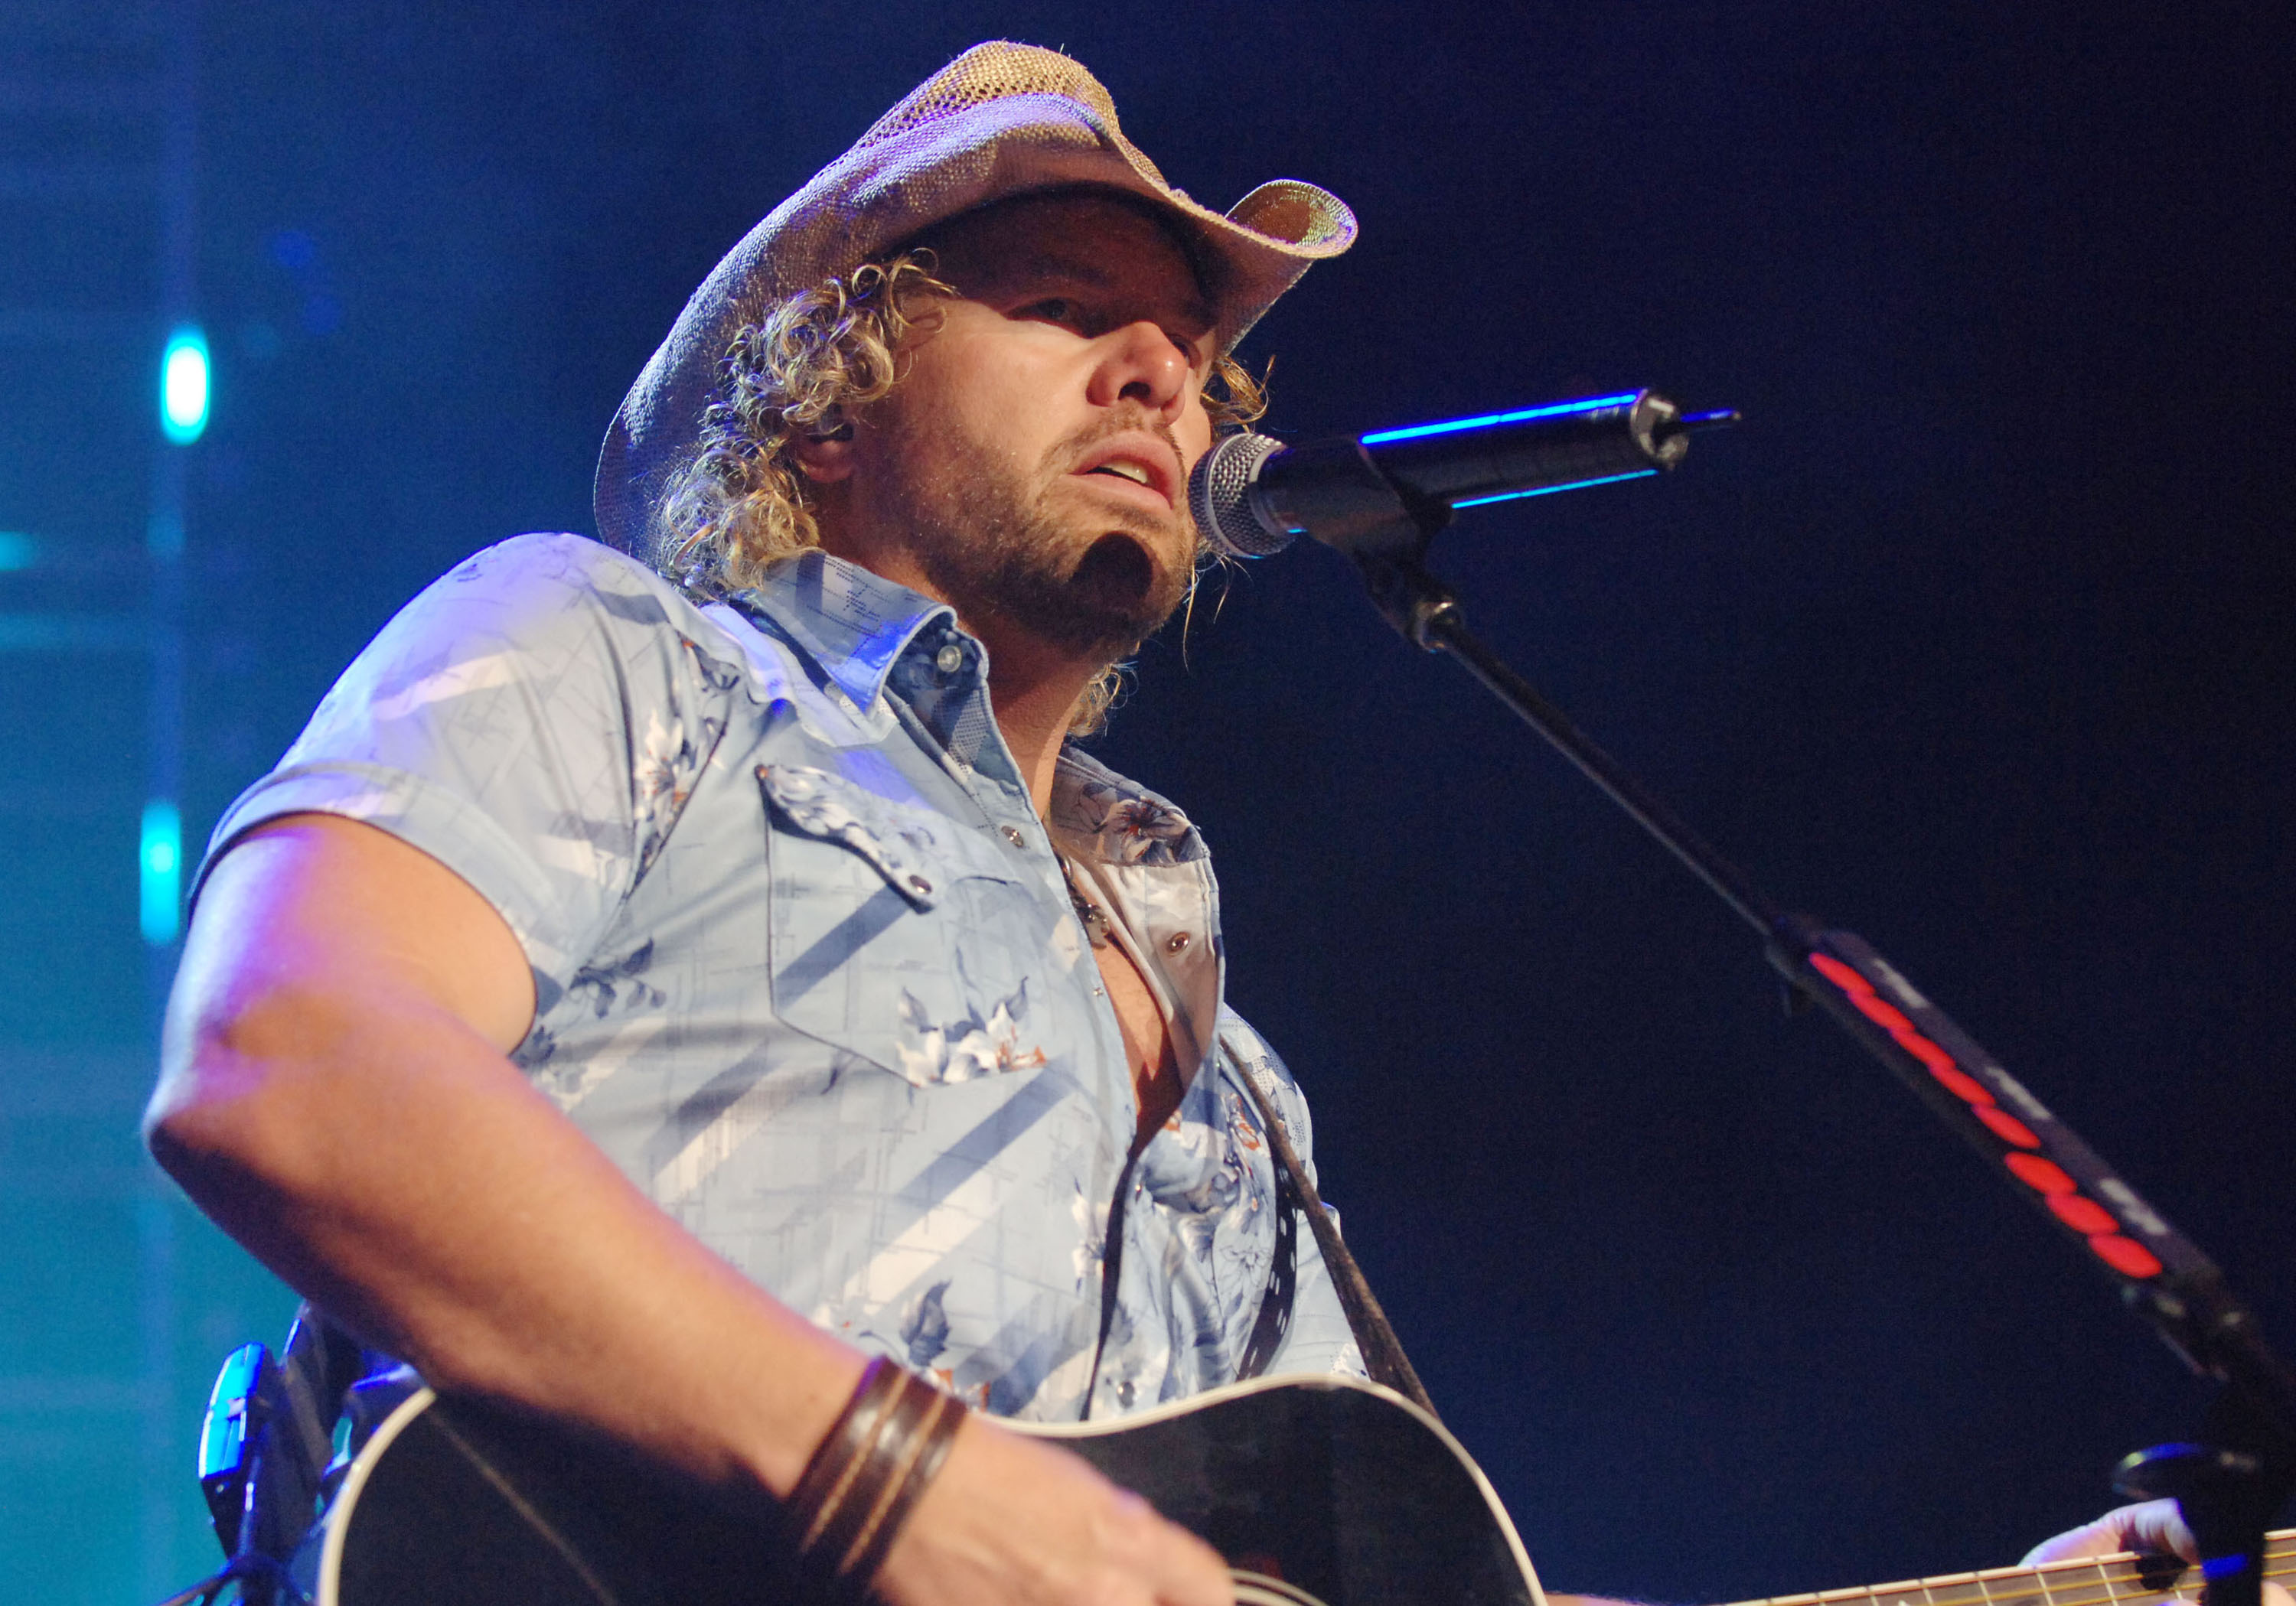 Toby Keith in Atlanta in 2005 | Source: Getty Images